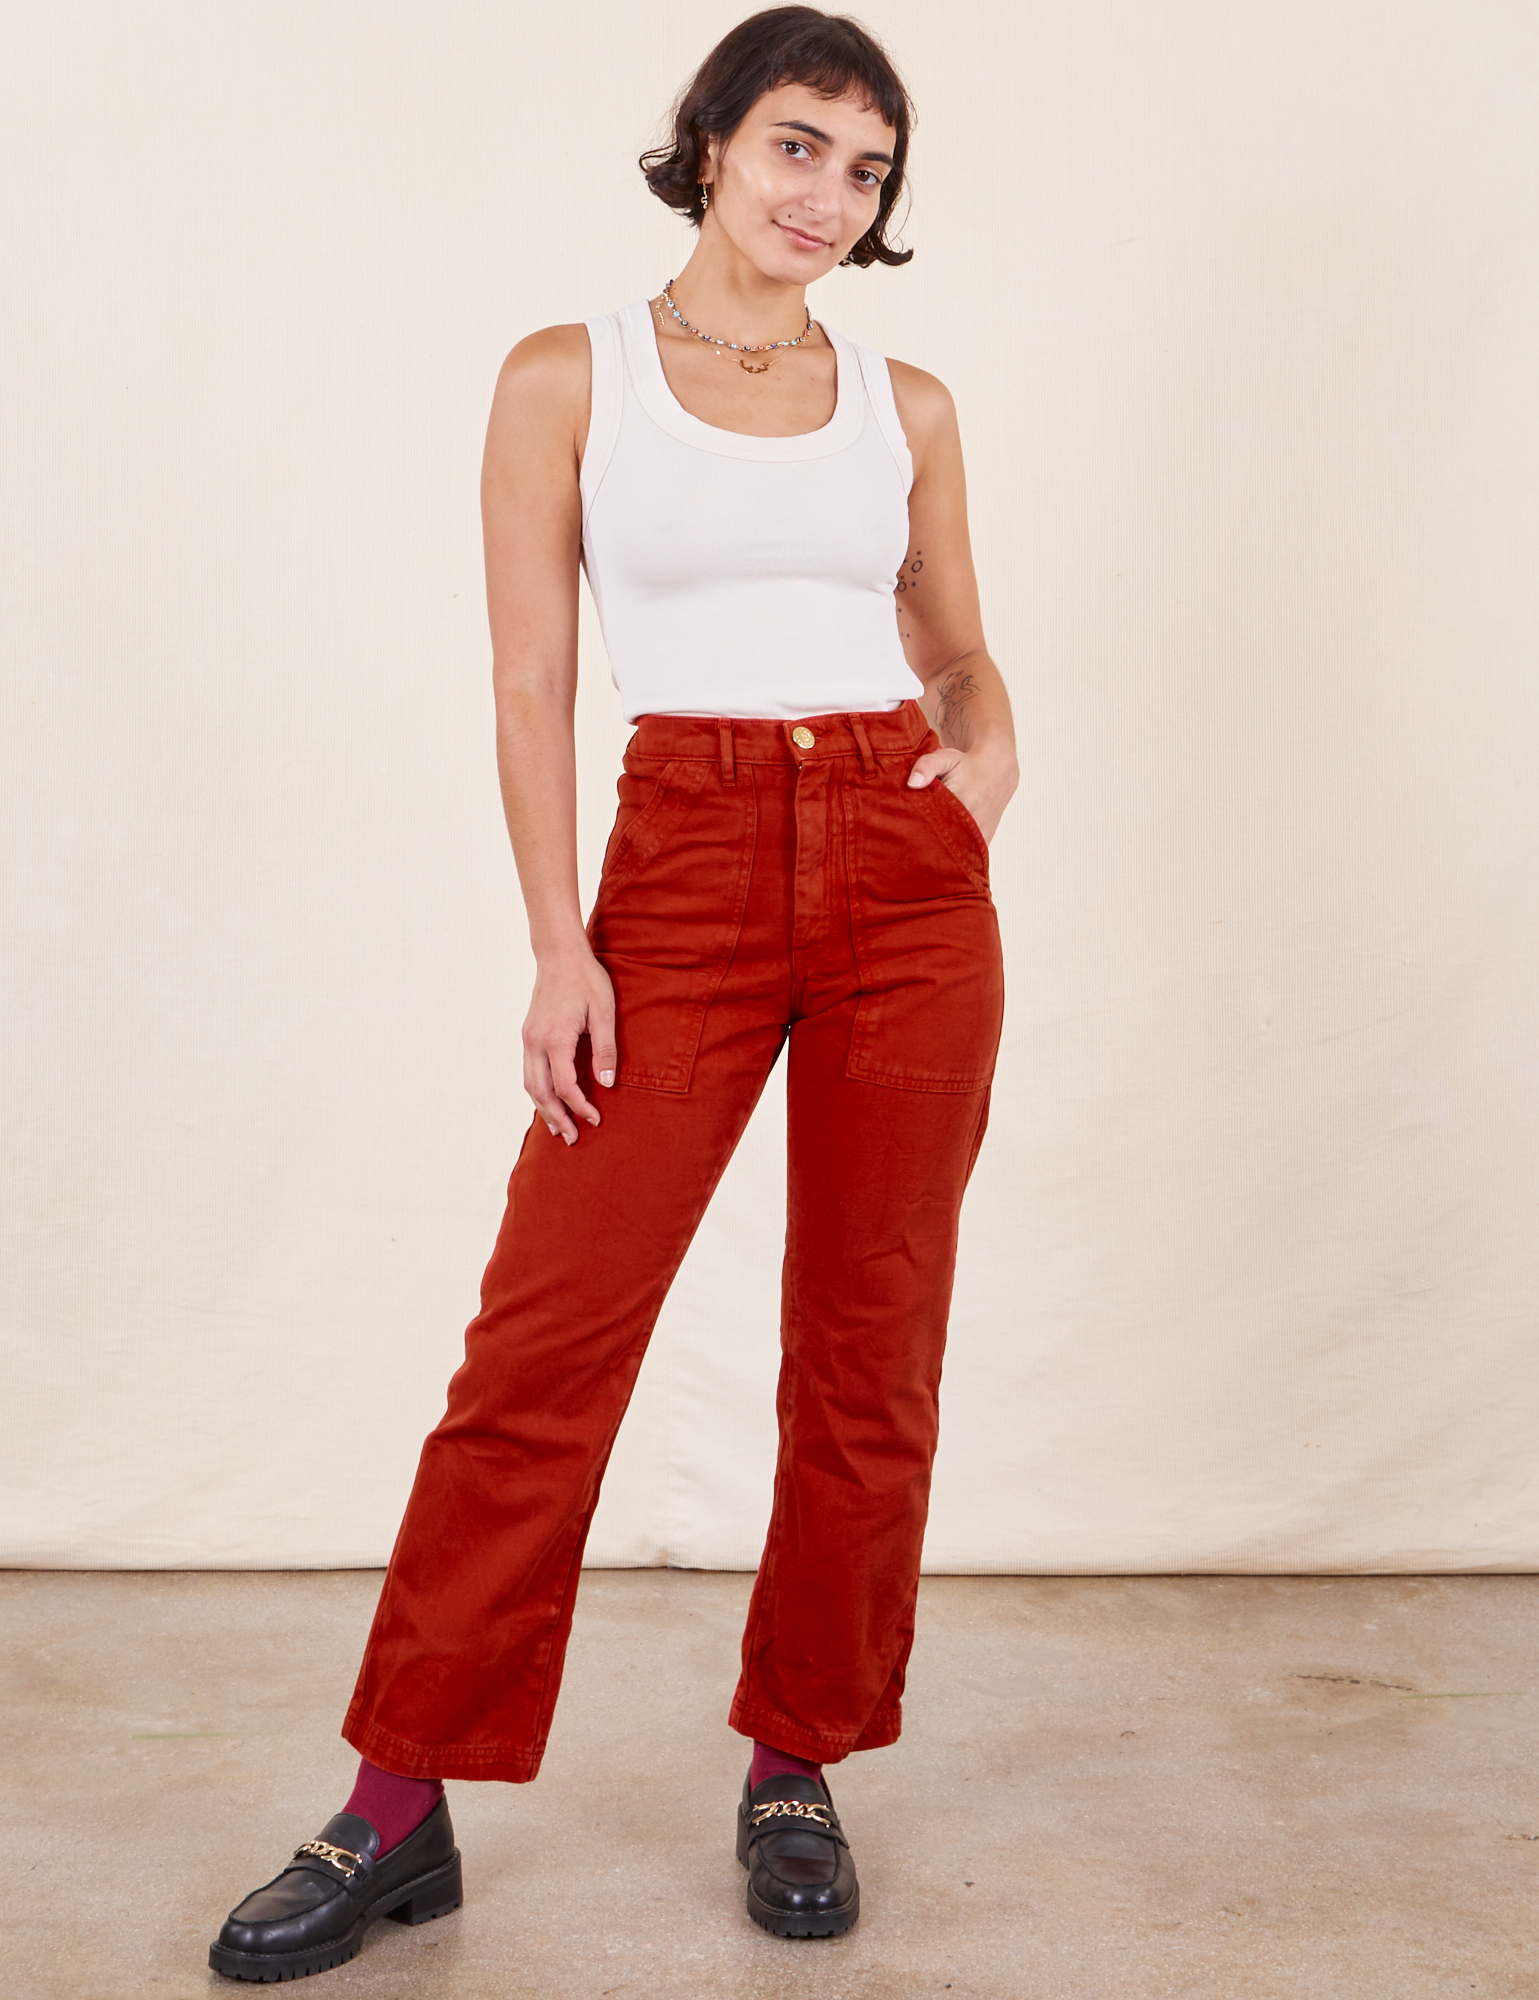 Soraya is 5&#39;2&quot; and wearing Petite XXS Work Pants in Paprika paired with vintage off-white Tank Top